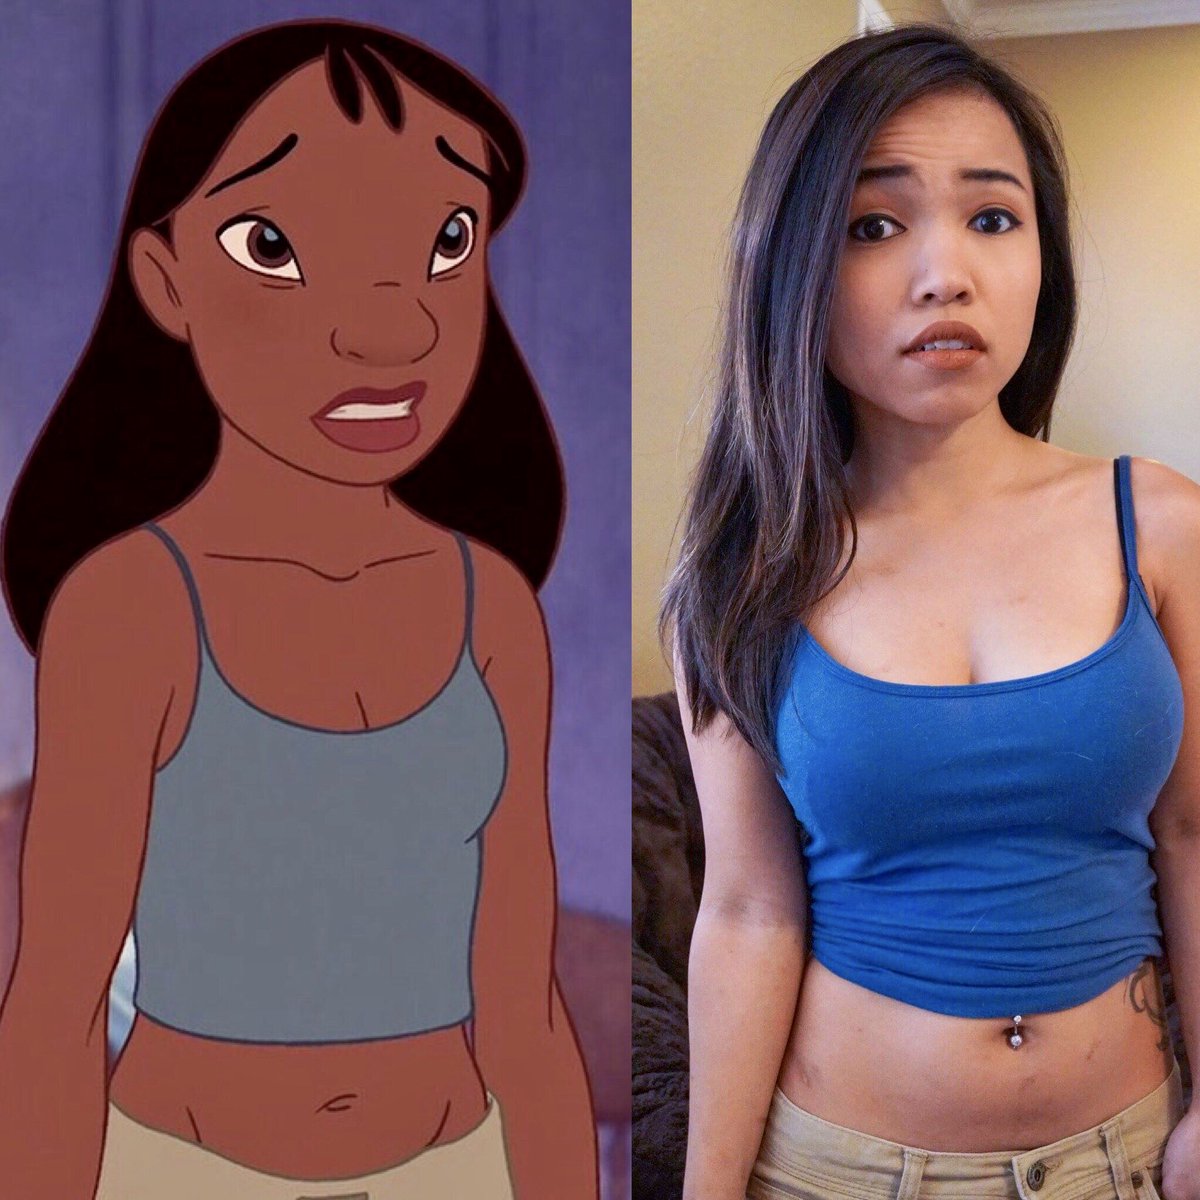 When I realized my outfit of the day looked like Nani from Lilo & Stitc...